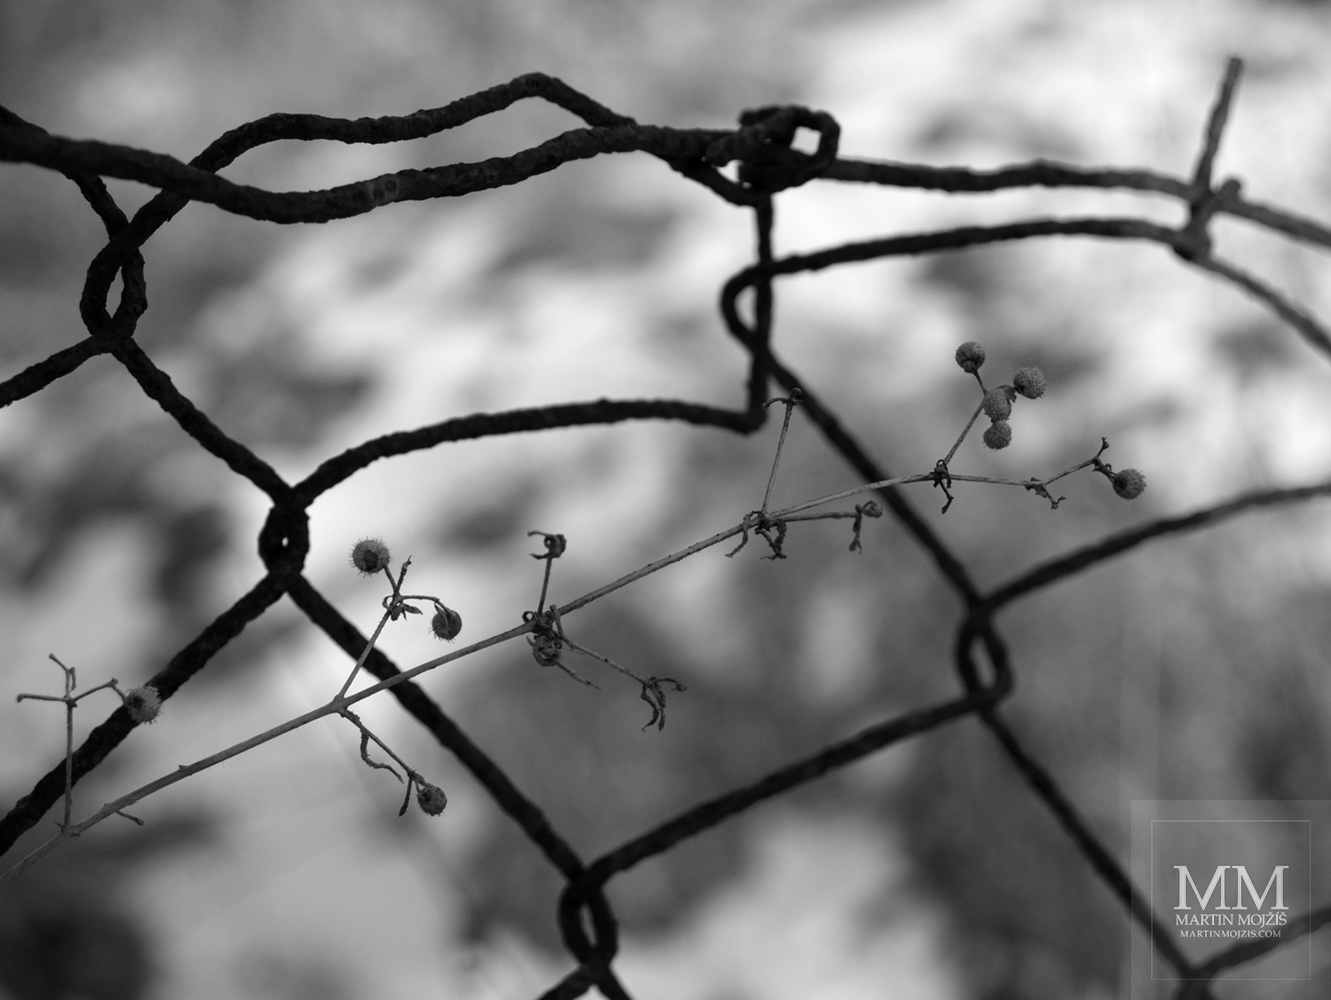 Twig of bush and wire fence mesh. Photograph with the title IN THE FENCE.